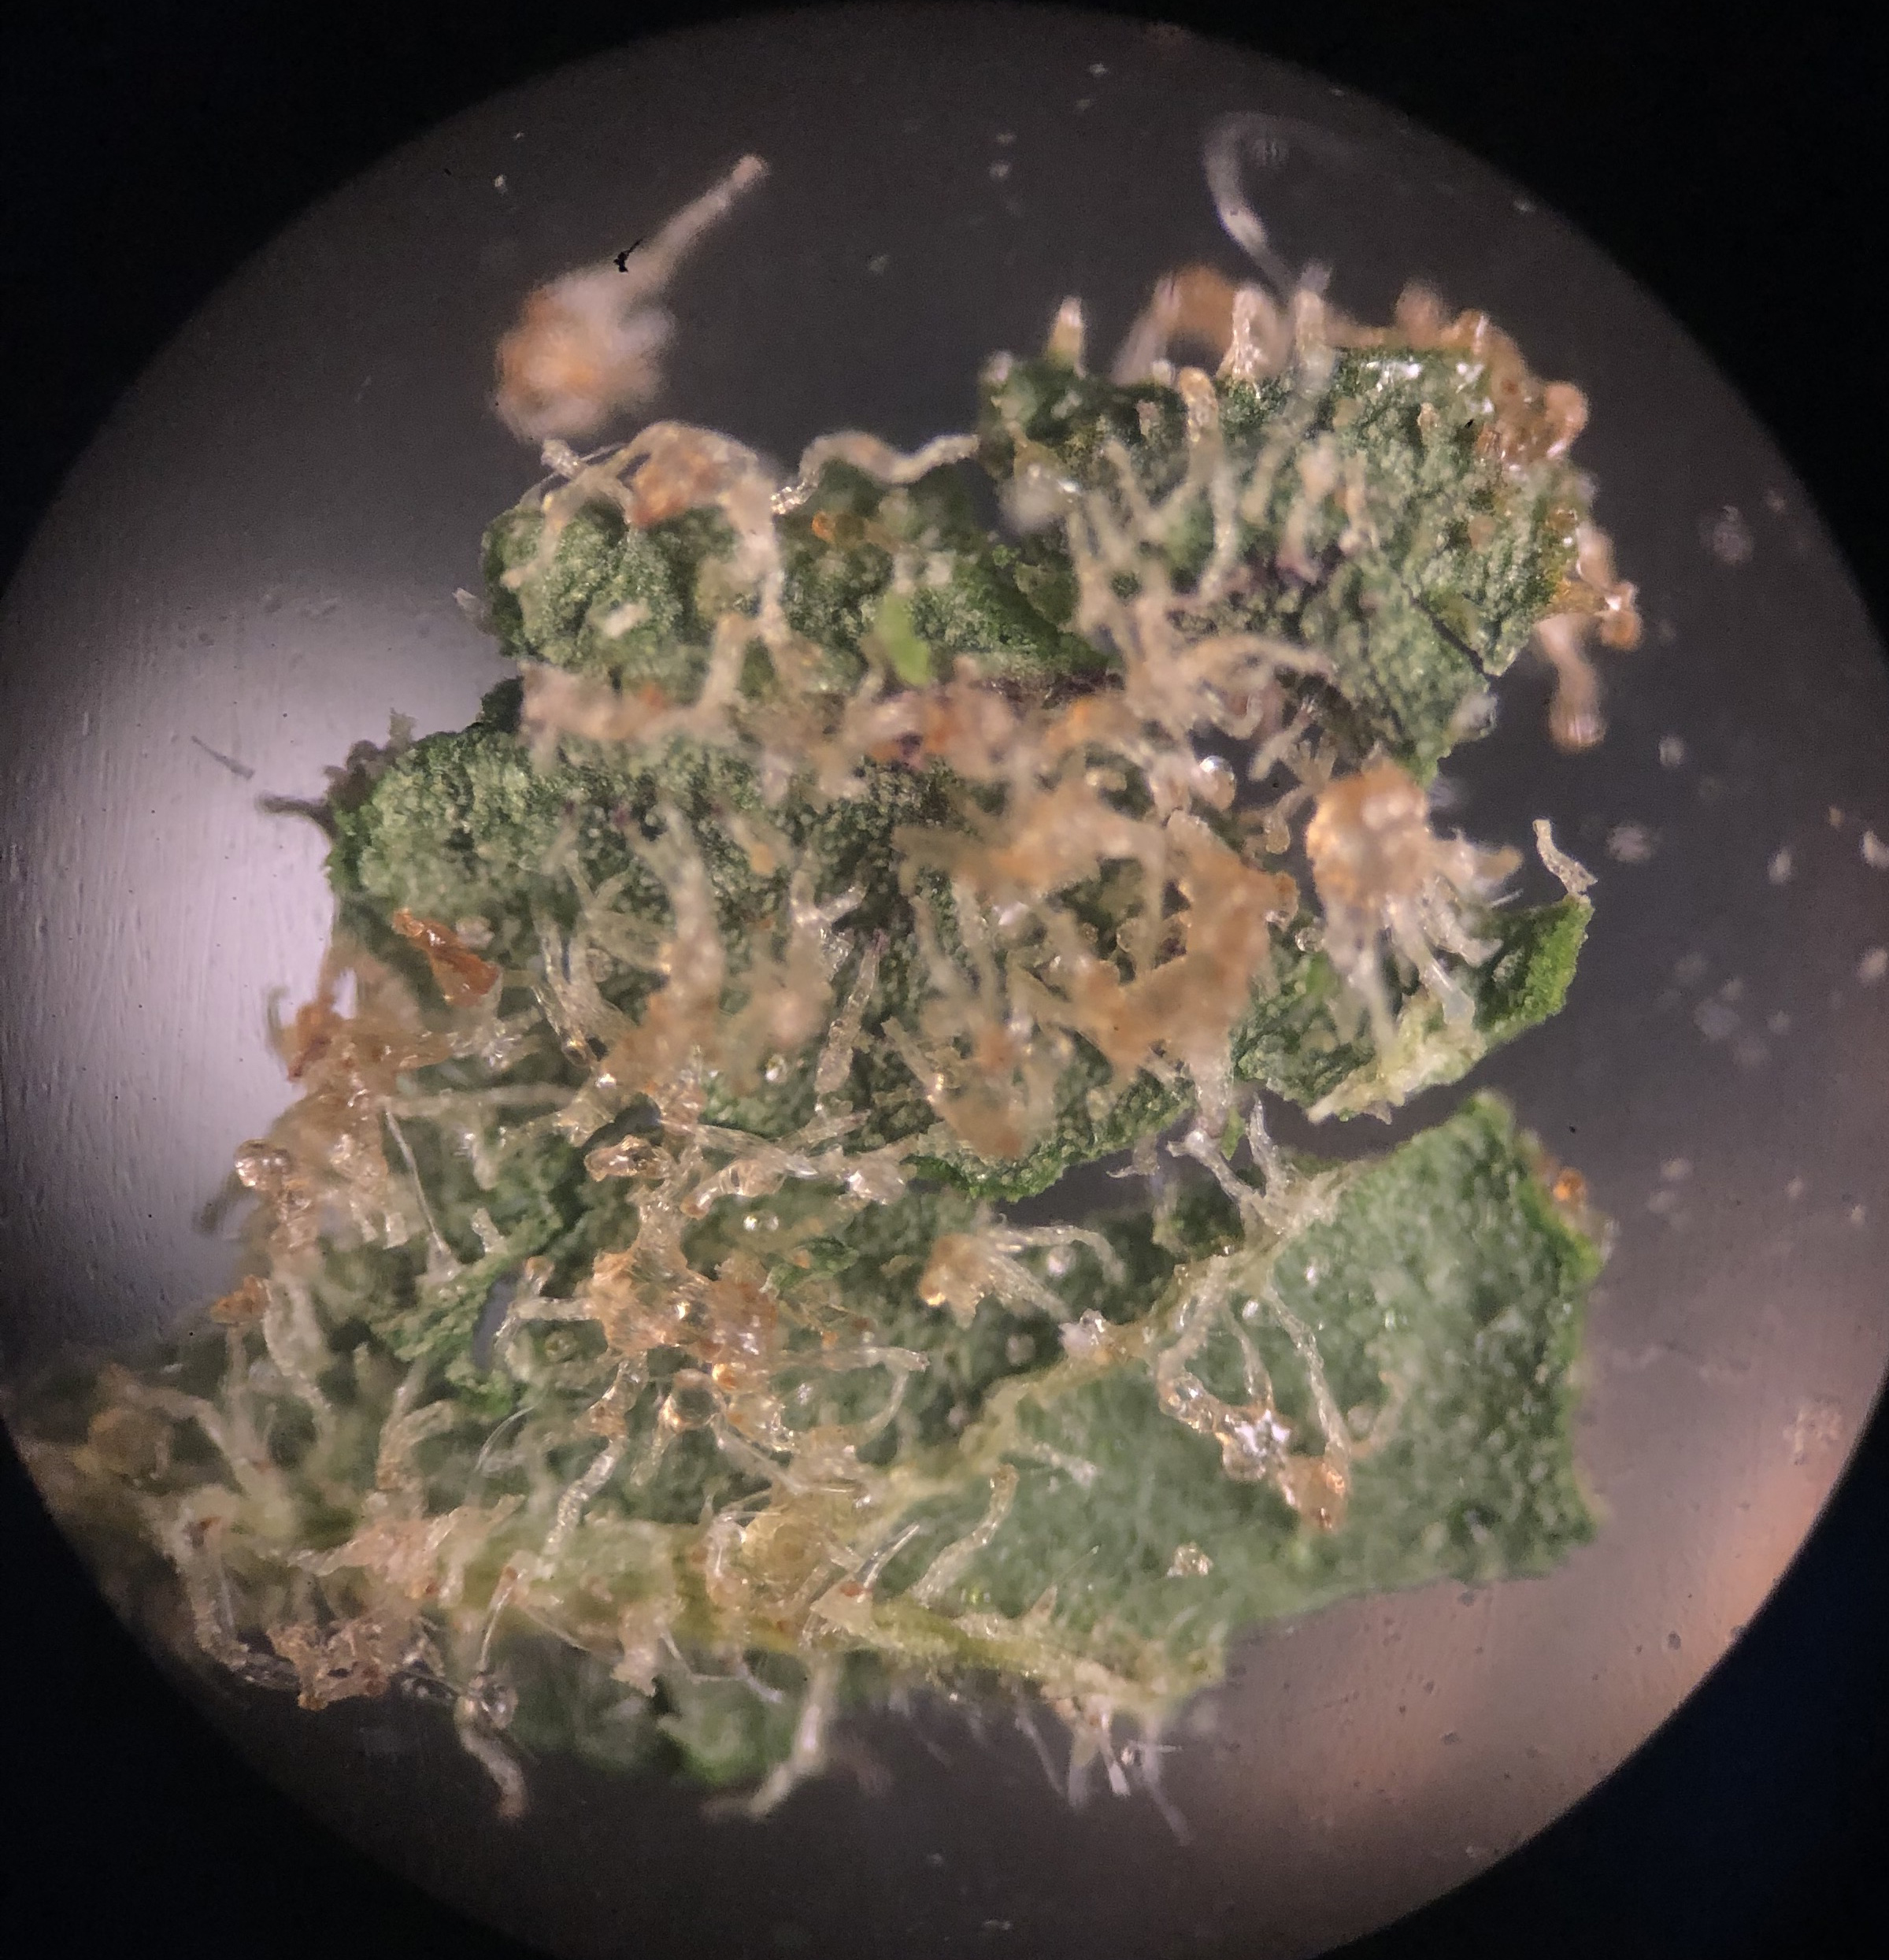 Why You Should Use A Microscope During Cannabis Cultivation - RQS Blog